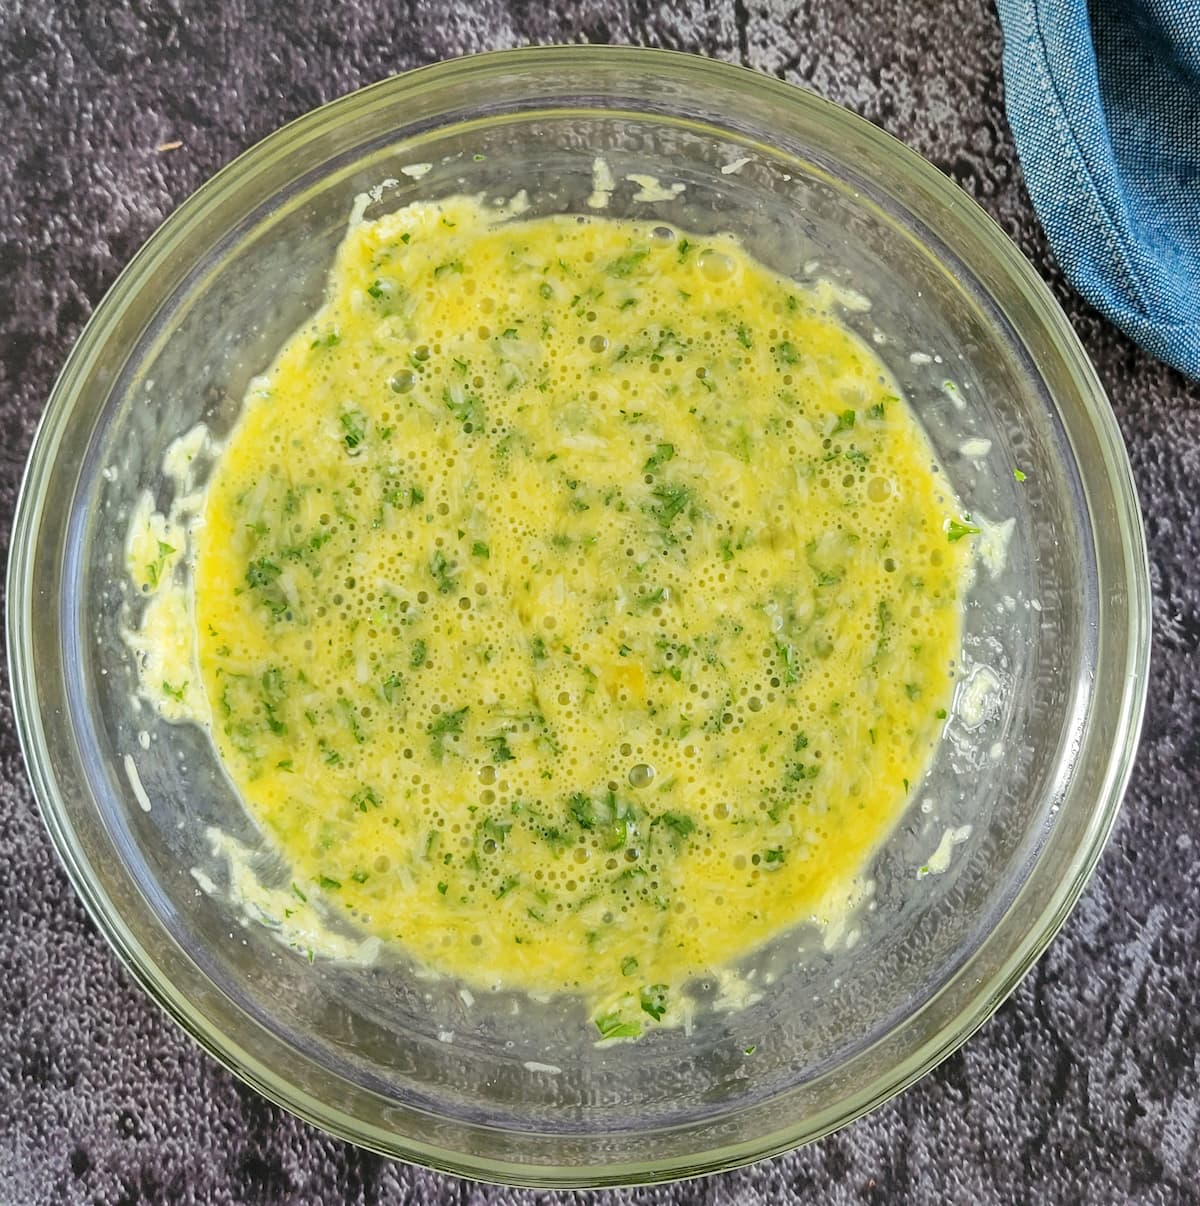 beaten eggs in a bowl with parsley